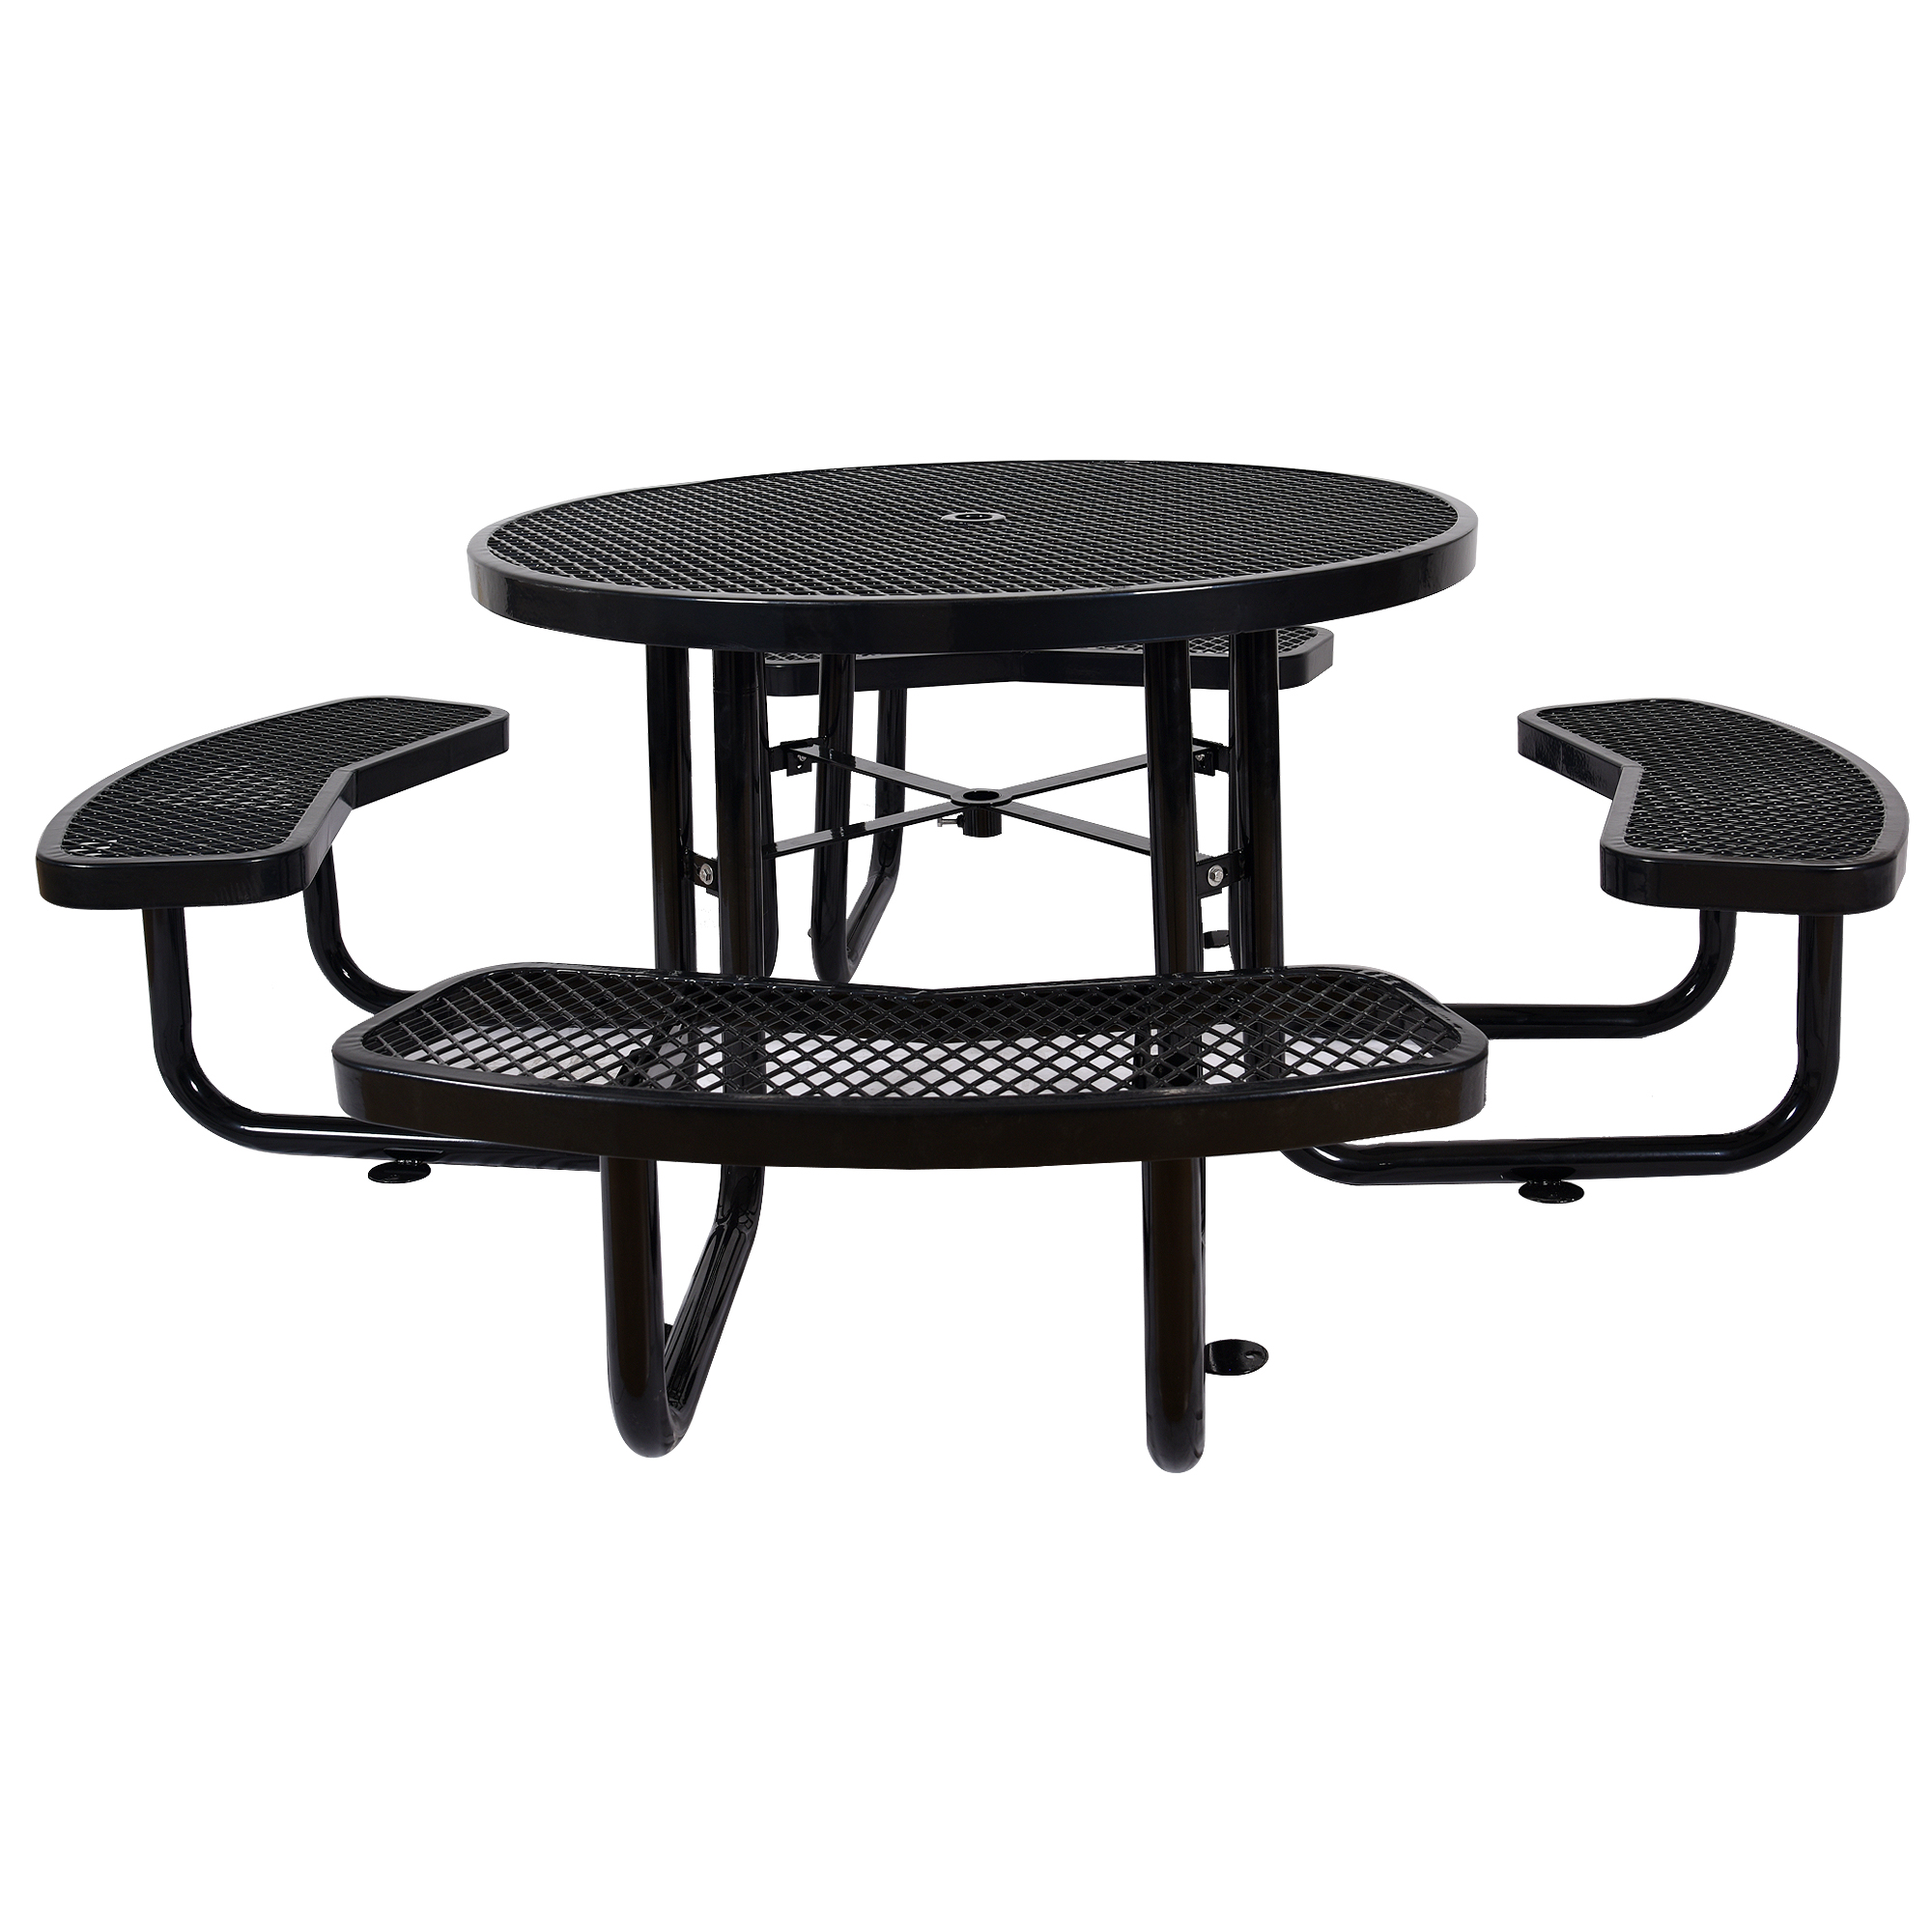 46" Steel Round Picnic Table, Expanded, Industrial Metal Outdoor Table Large Camping Picnic Tables for Backyard Poolside Dining Party Garden Patio Lawn Deck (Black) - image 5 of 7